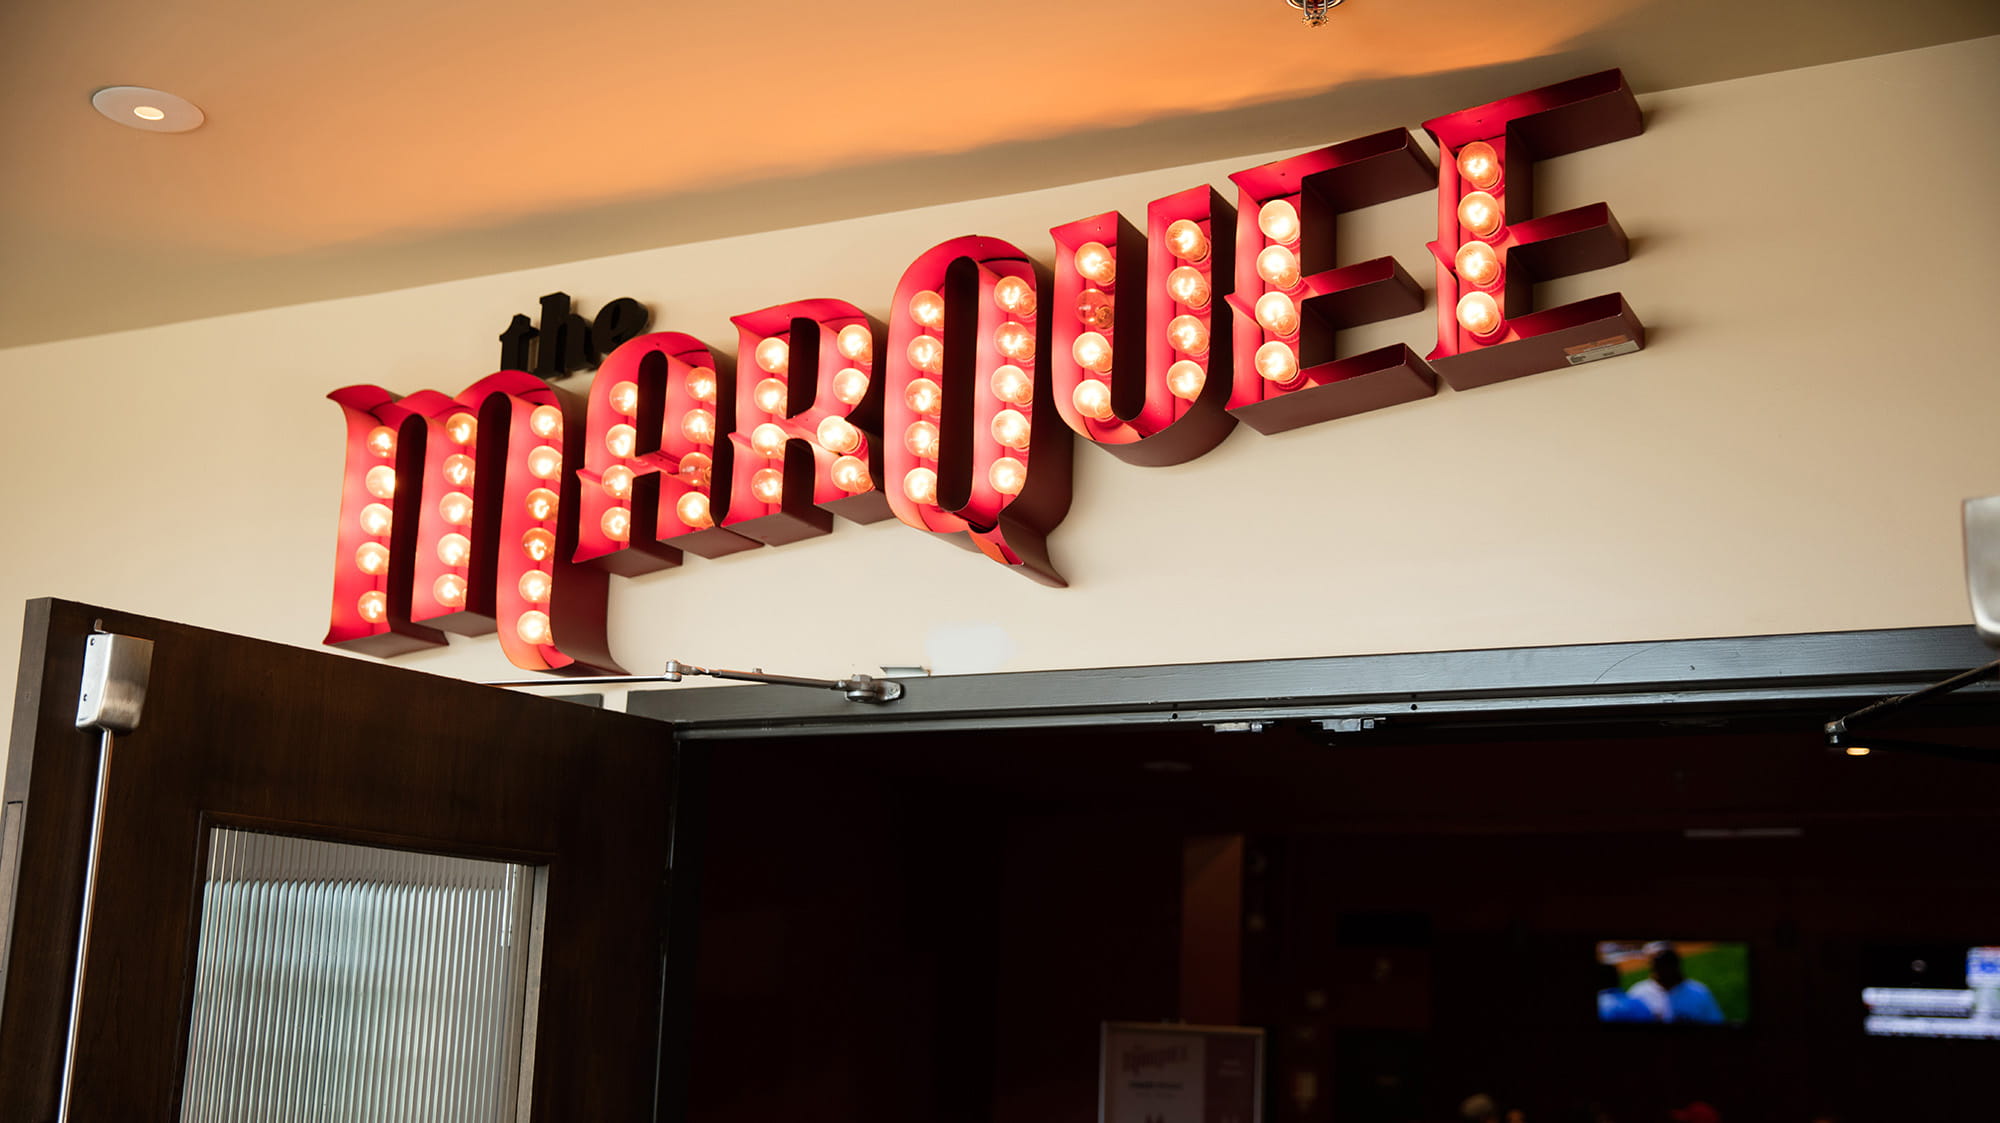 The Marquee sign with red letters and lights over the door to the pub